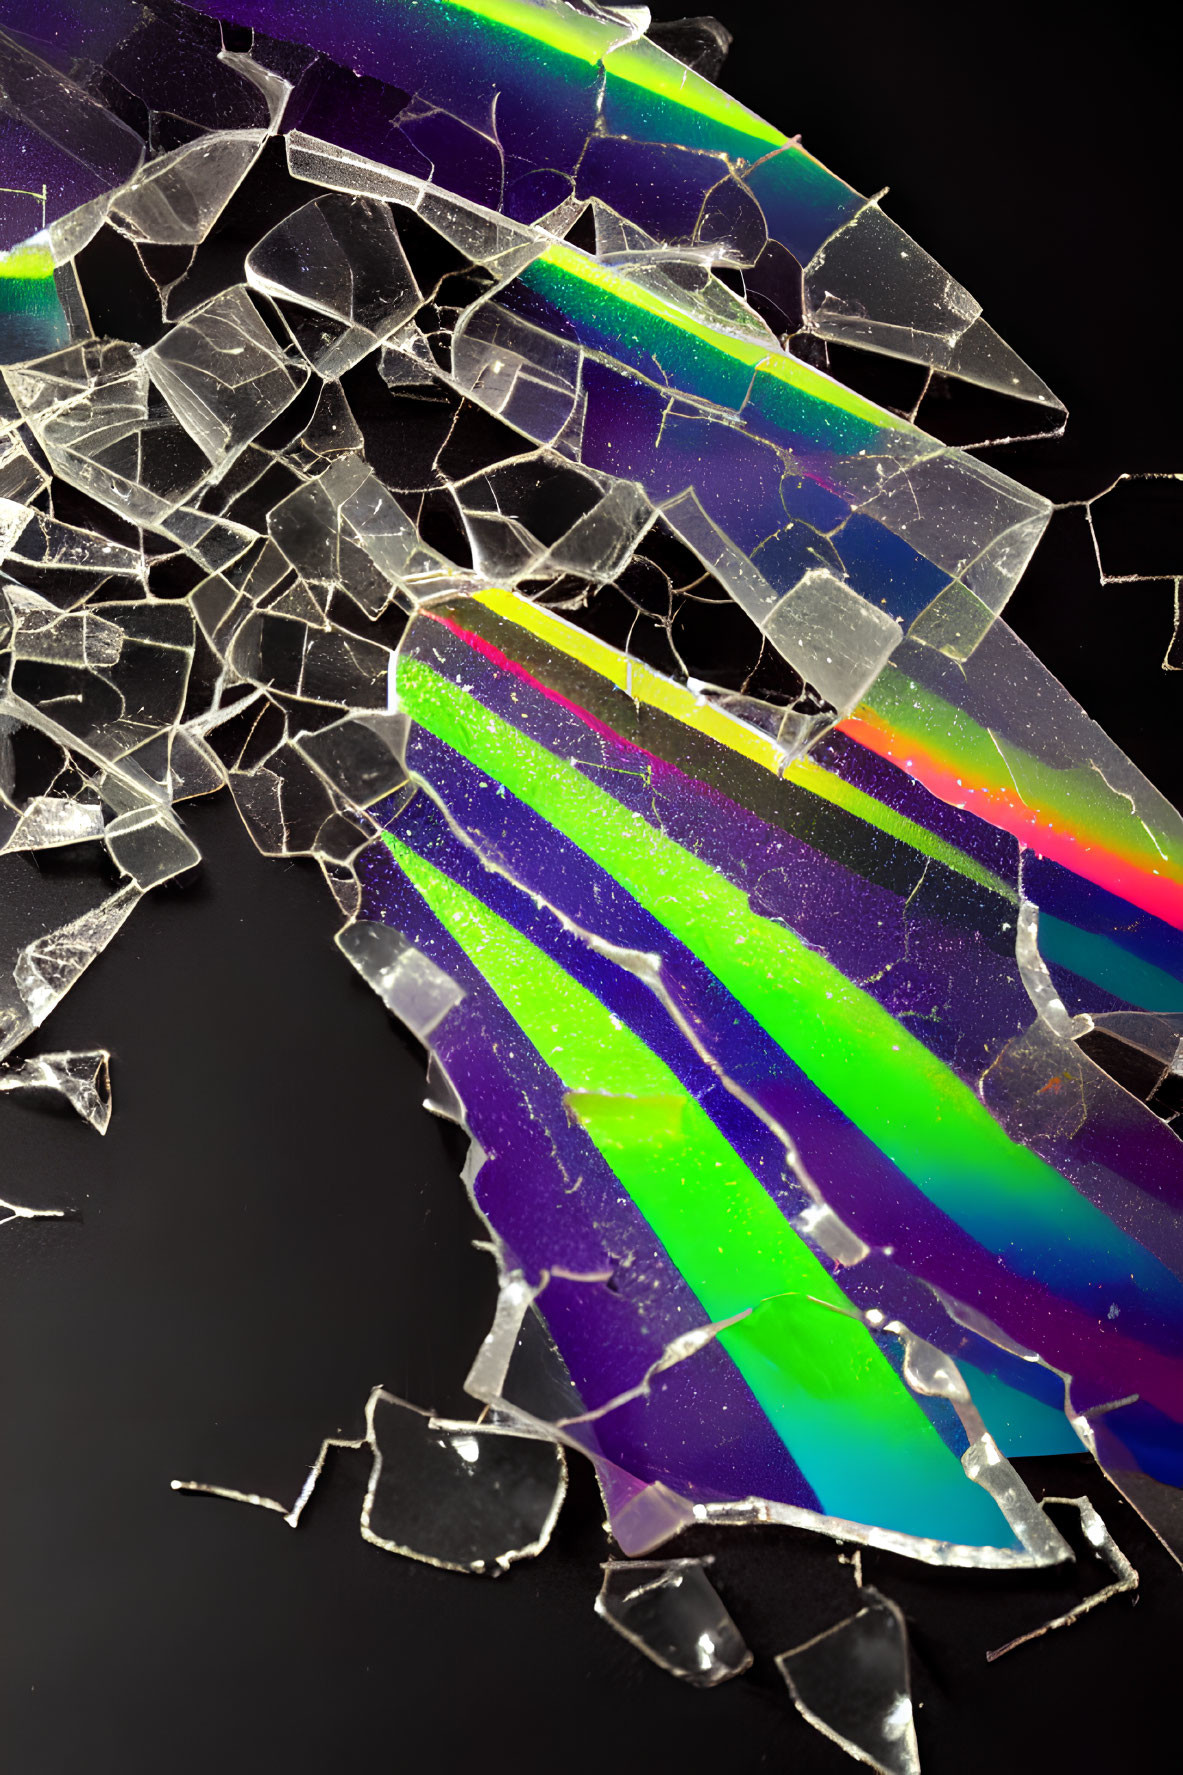 Iridescent glass shards on dark surface with colorful reflections